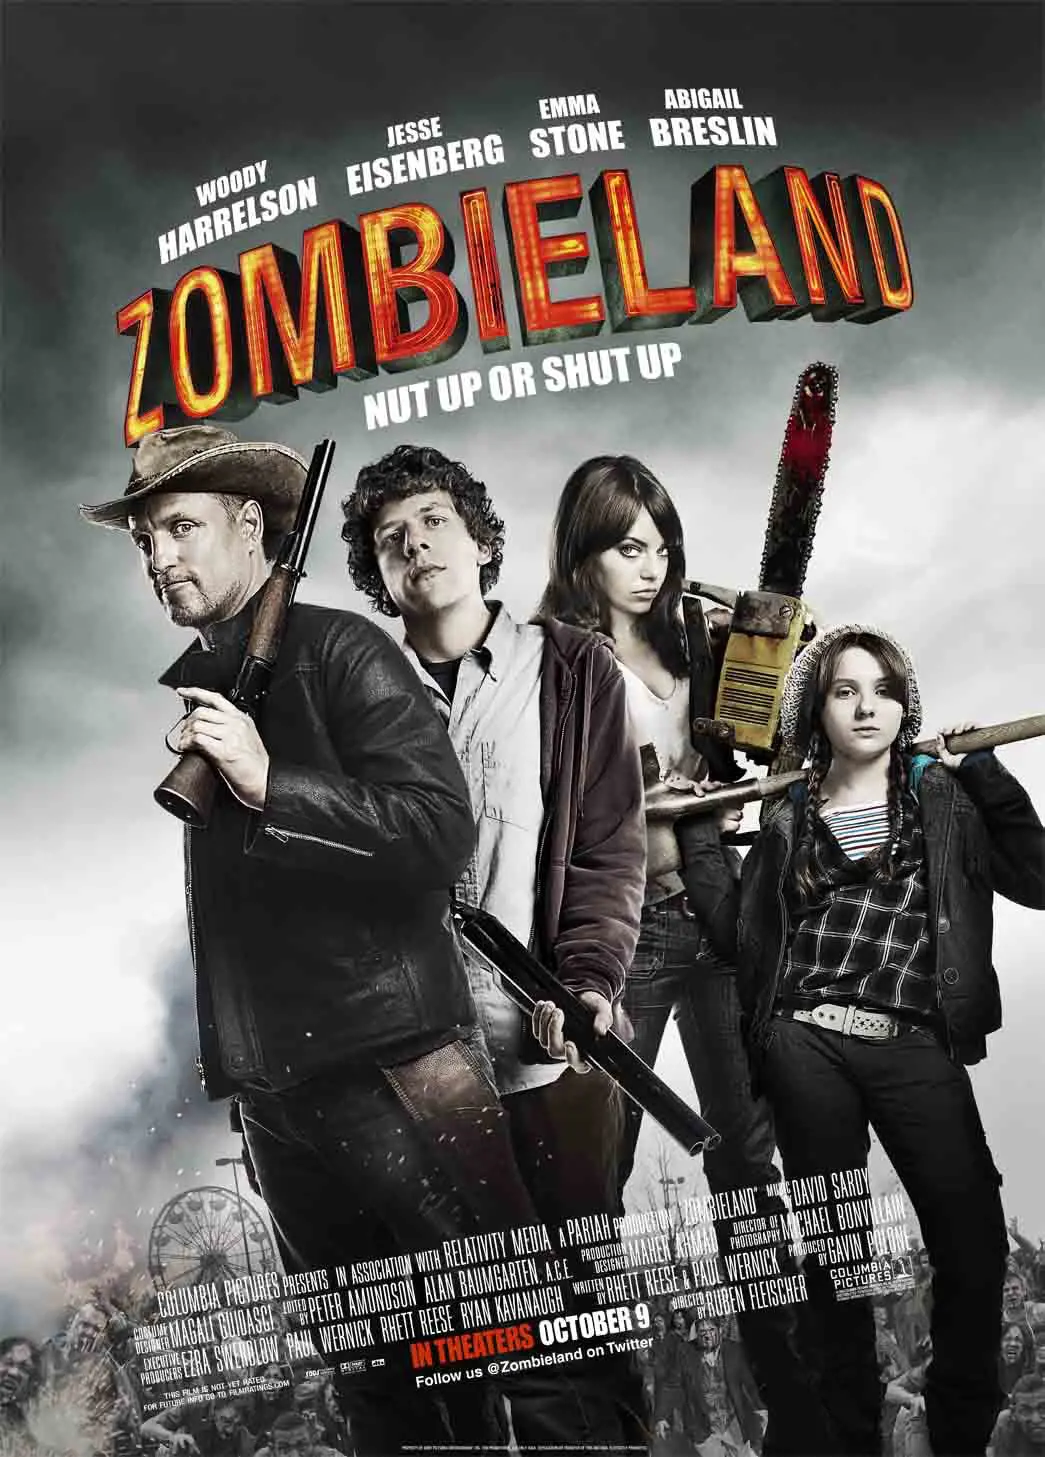 Zombieland Featuring Woody Harrelson, Bill Murray and Other Actors